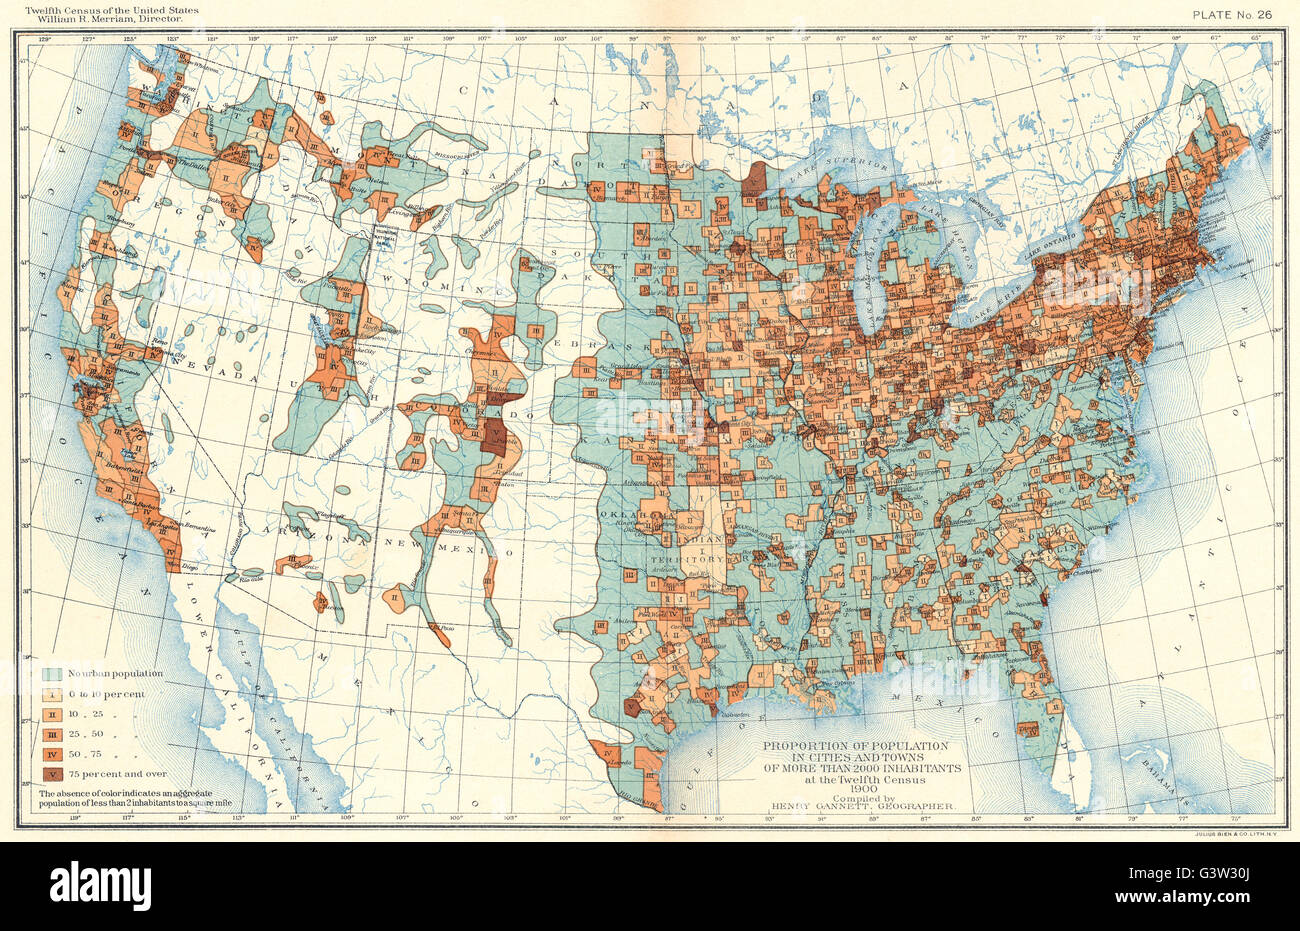 USA: Proportion of population in cities & towns 2000+ Inhabitants , 1900 map Stock Photo